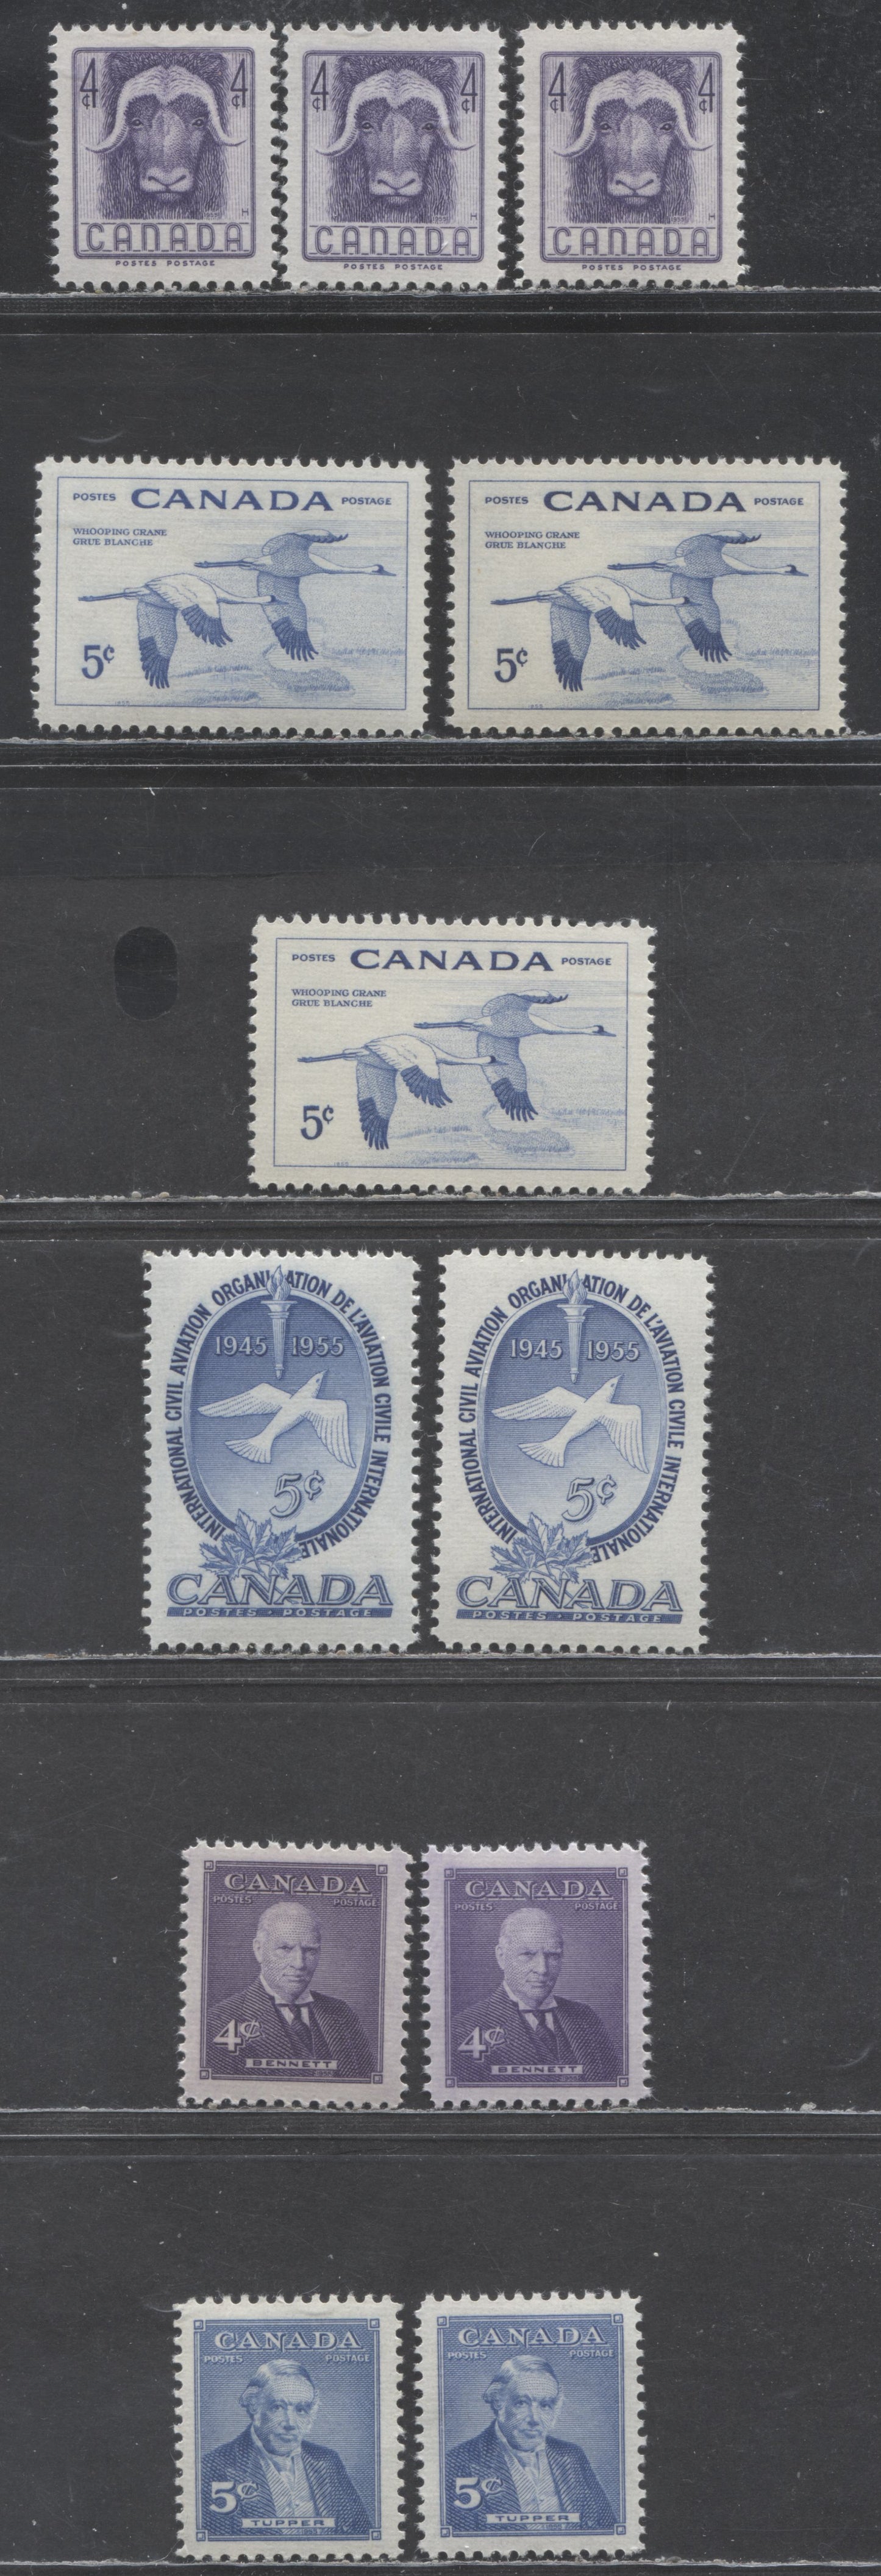 Canada #352-354, 357-358 4c-5c Violet & Ultramarine Various Subjects, 1955 Wildlife Week Issue - Prime Ministers Issue, 12 VFNH Singles, Horizontally Ribbed Paper, Different Shades Cream & Yellowish Cream Satin & Semi-Gloss Gum